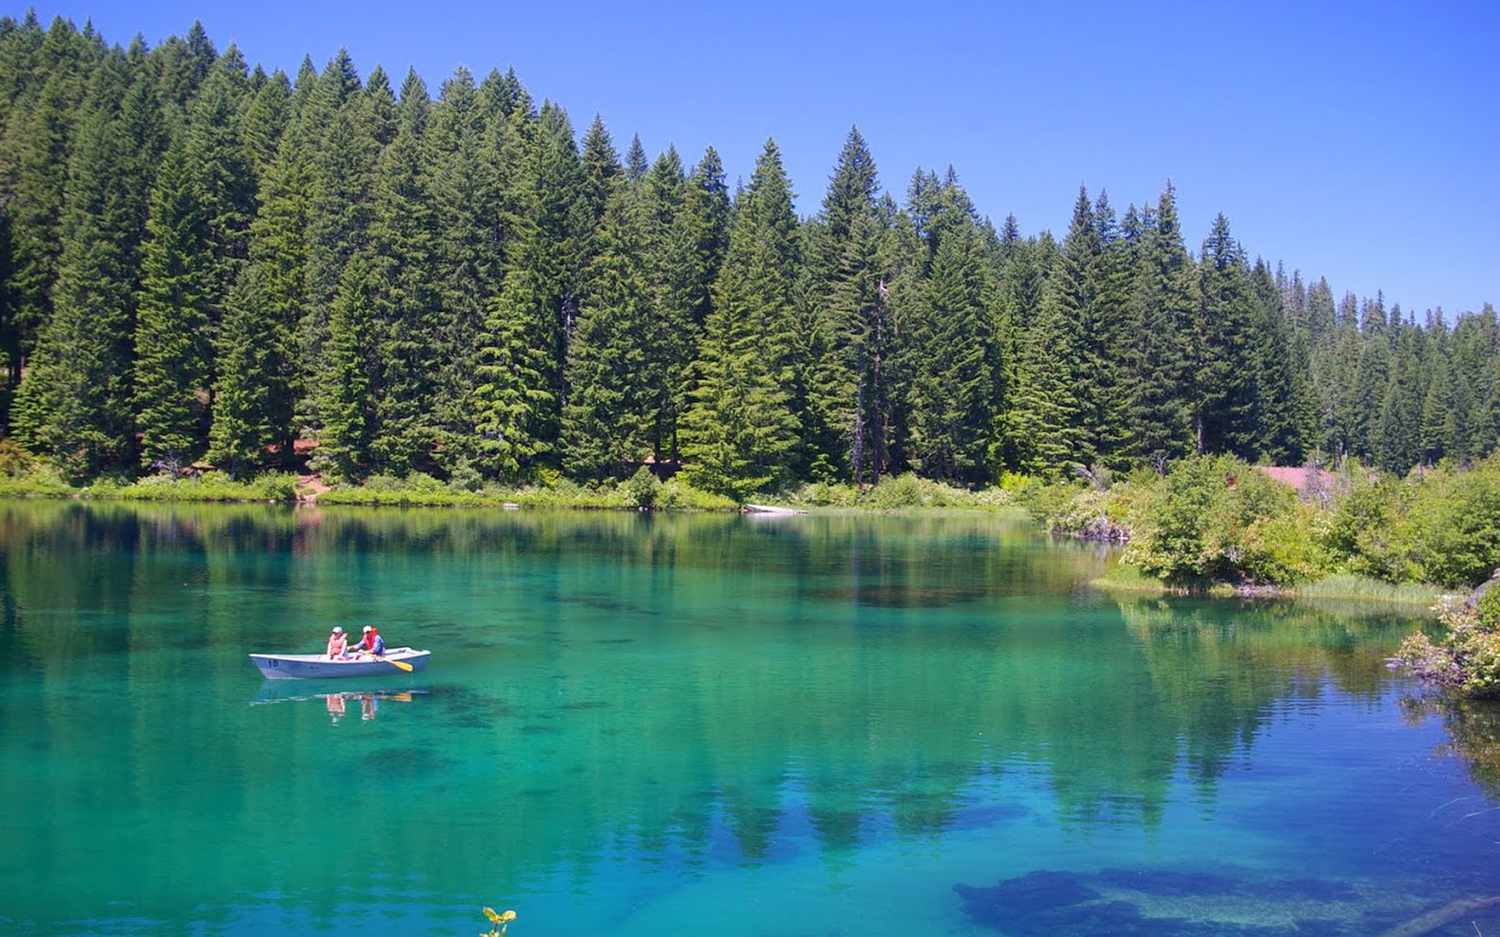 America's Most Beautiful Lake Has a Sunken Forest Beneath Its Crystal-clear Waters